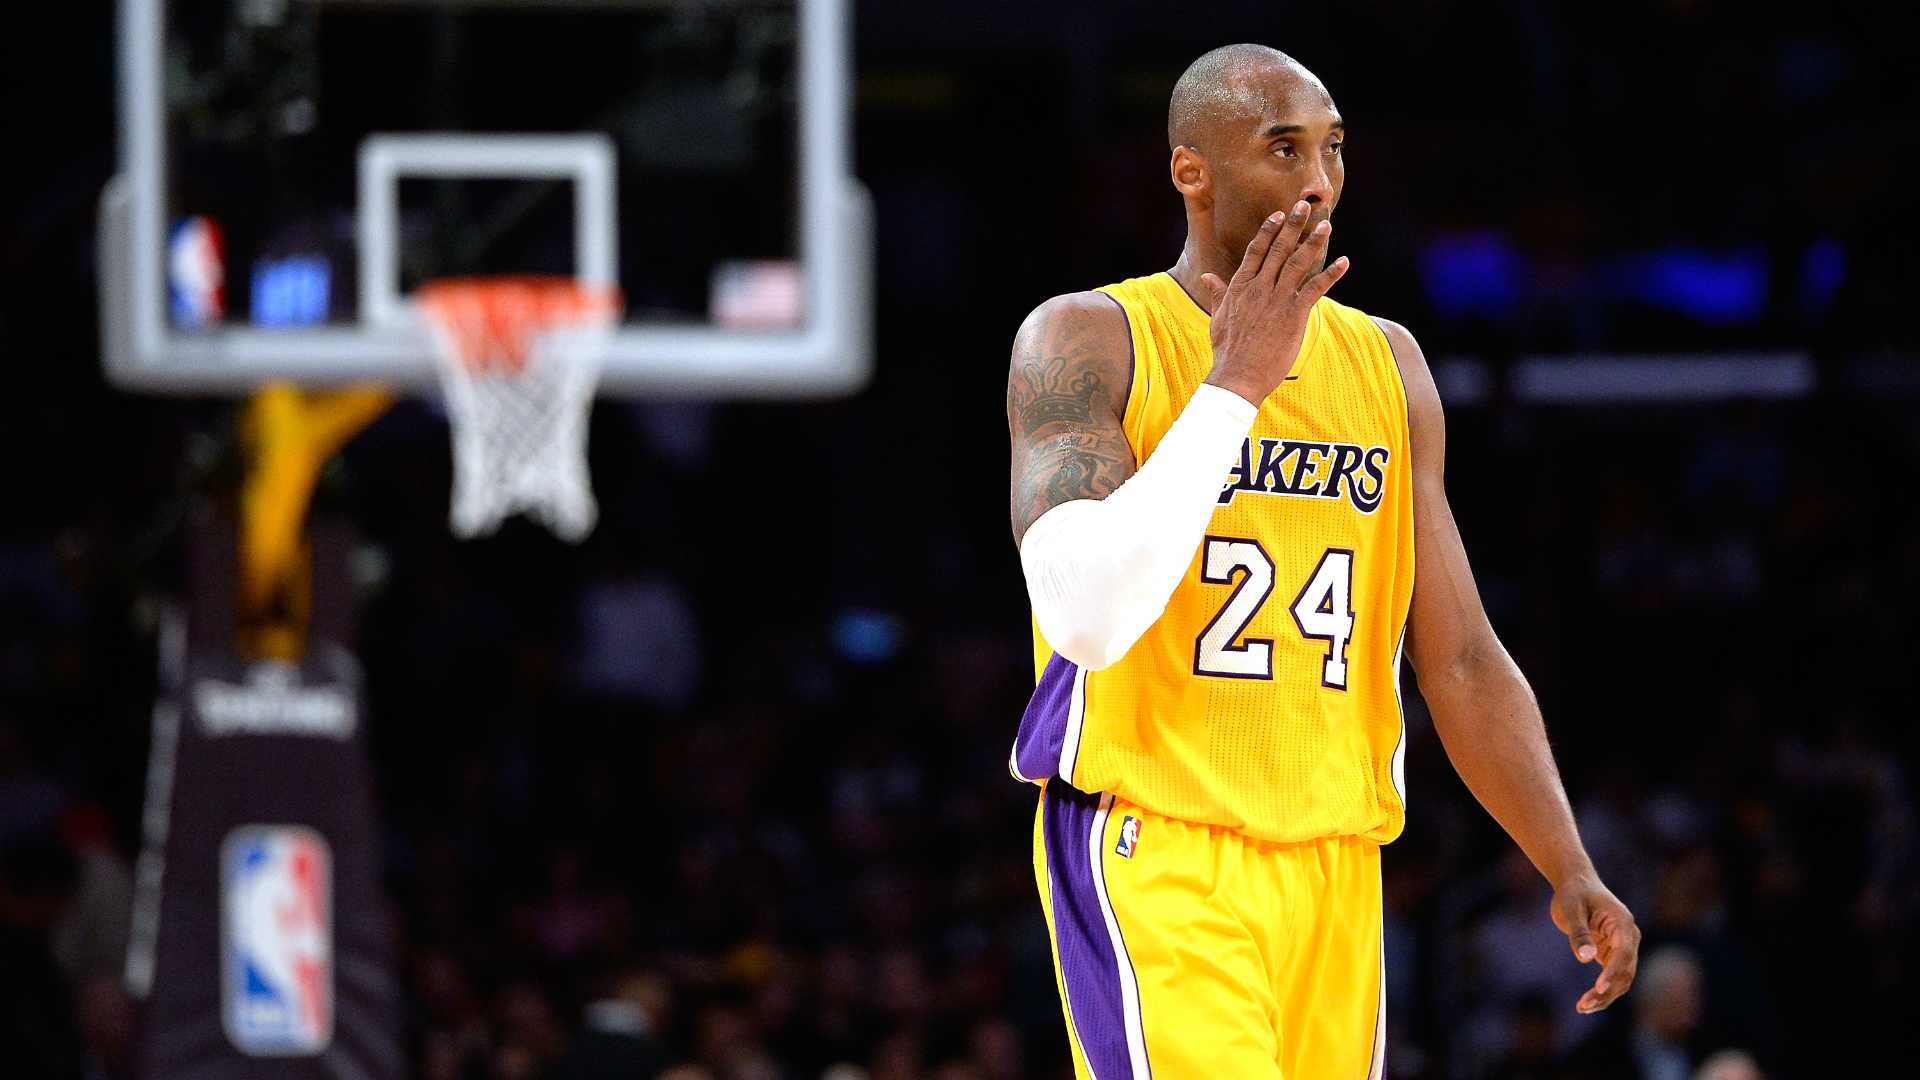 Kobe Bryant: 'Can't believe it' and African stars